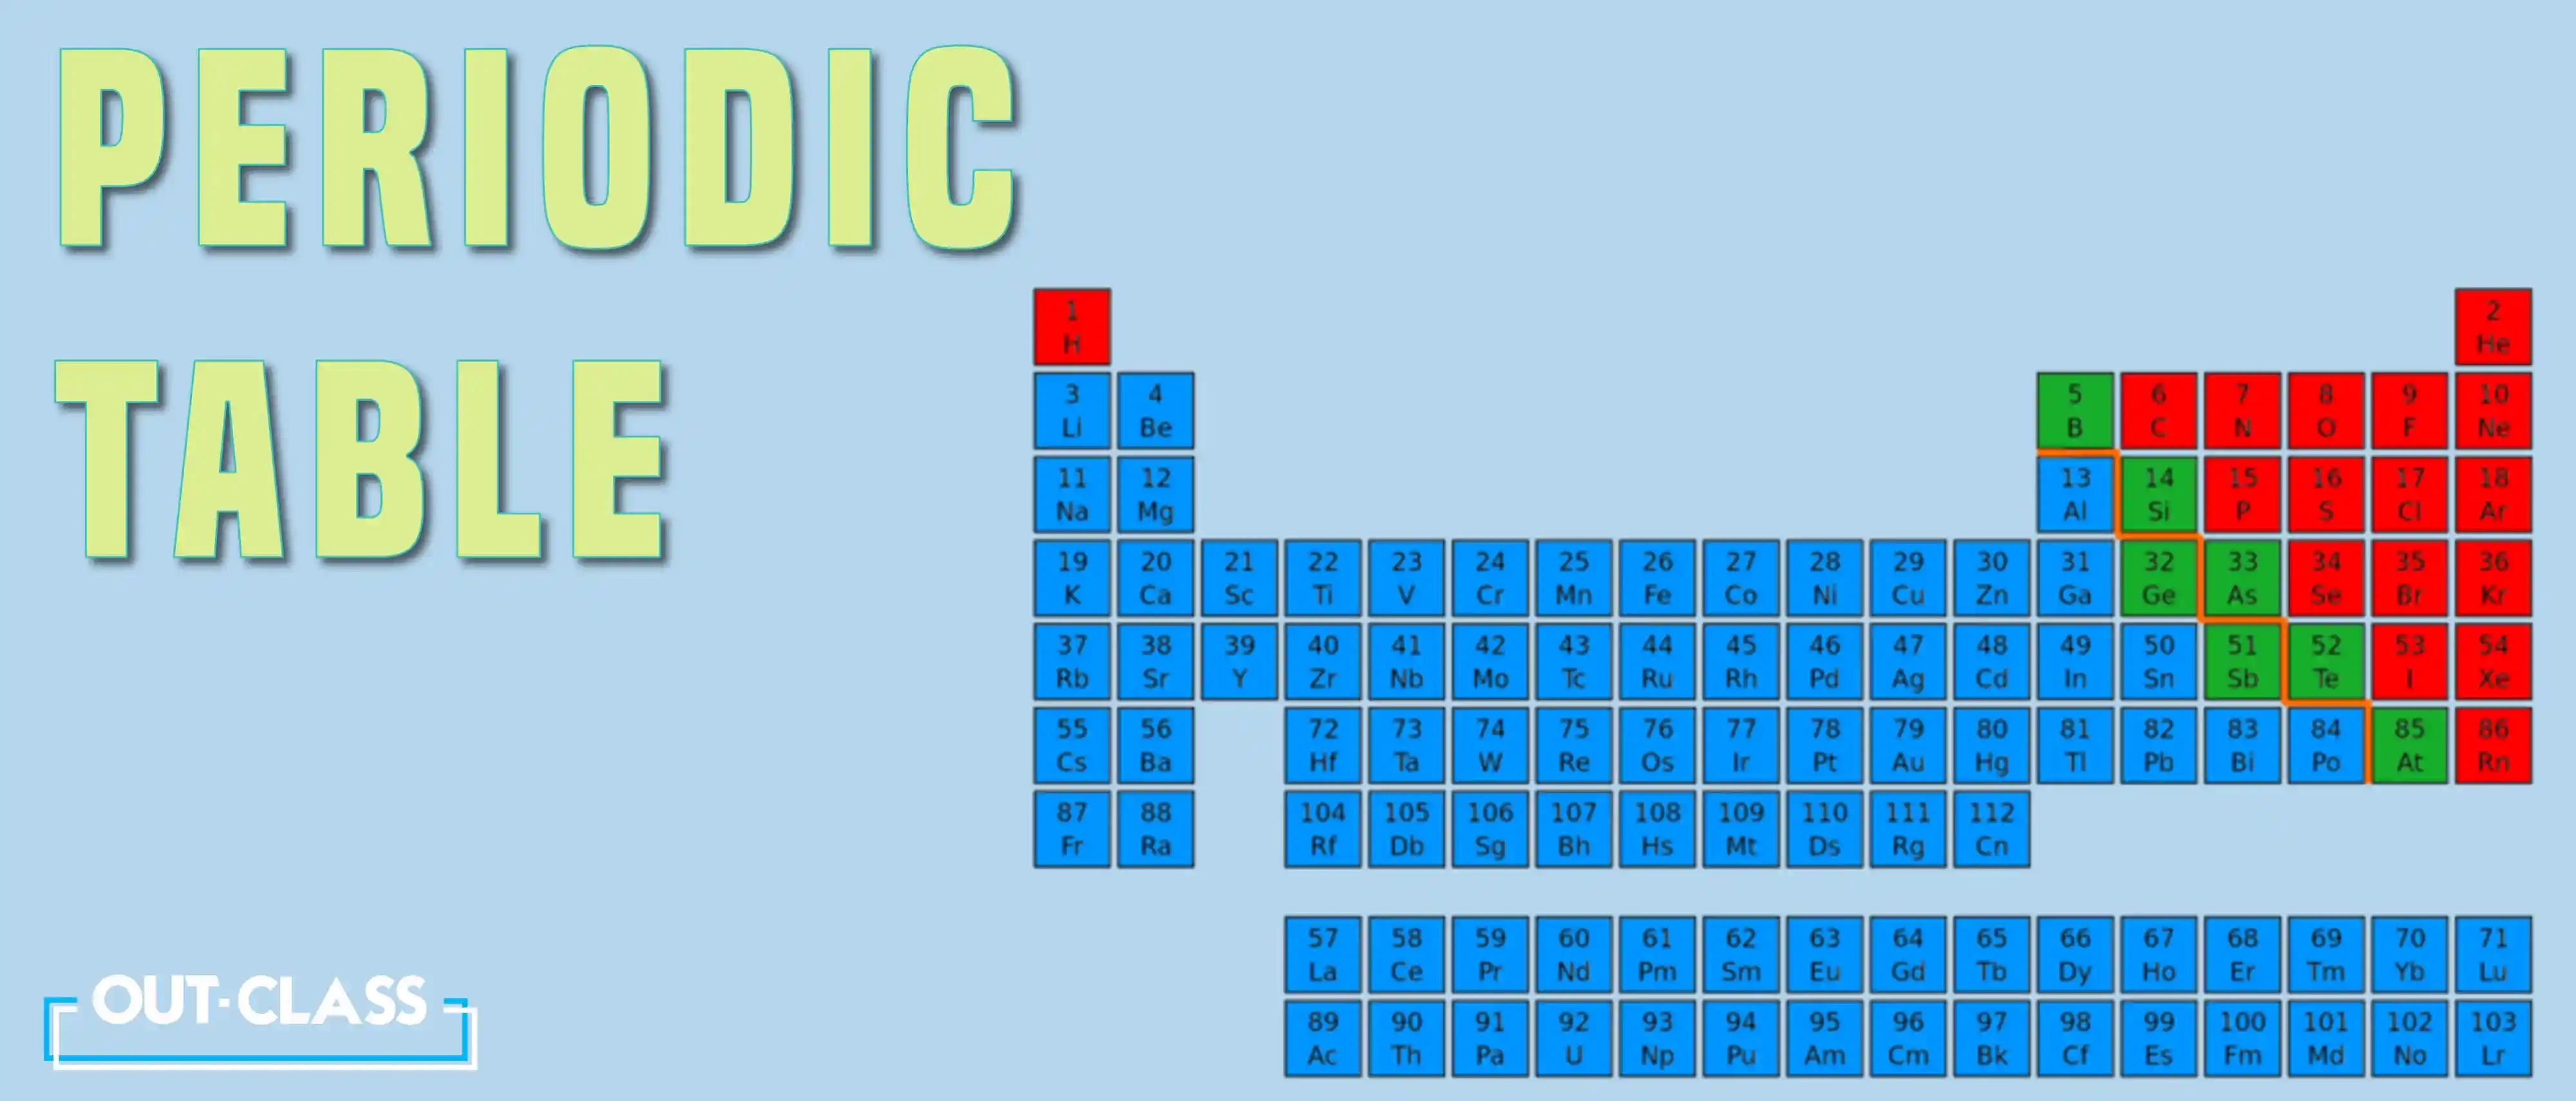 The periodic table illustrates an element which is a oure substance as it consists of only one type of atom.